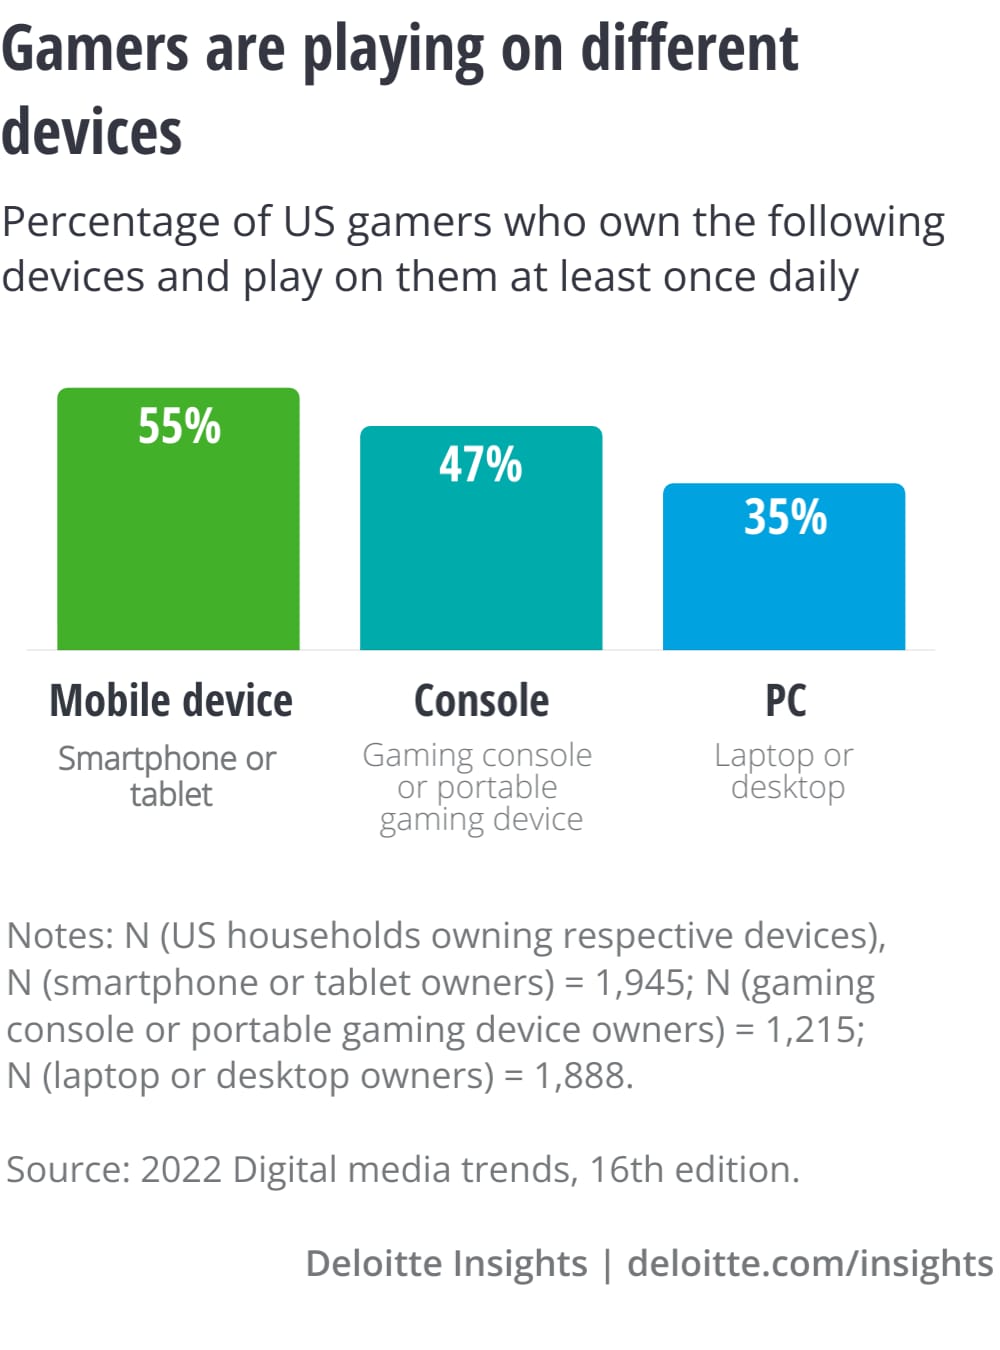 Figure 1. Many consumers play games on different devices daily